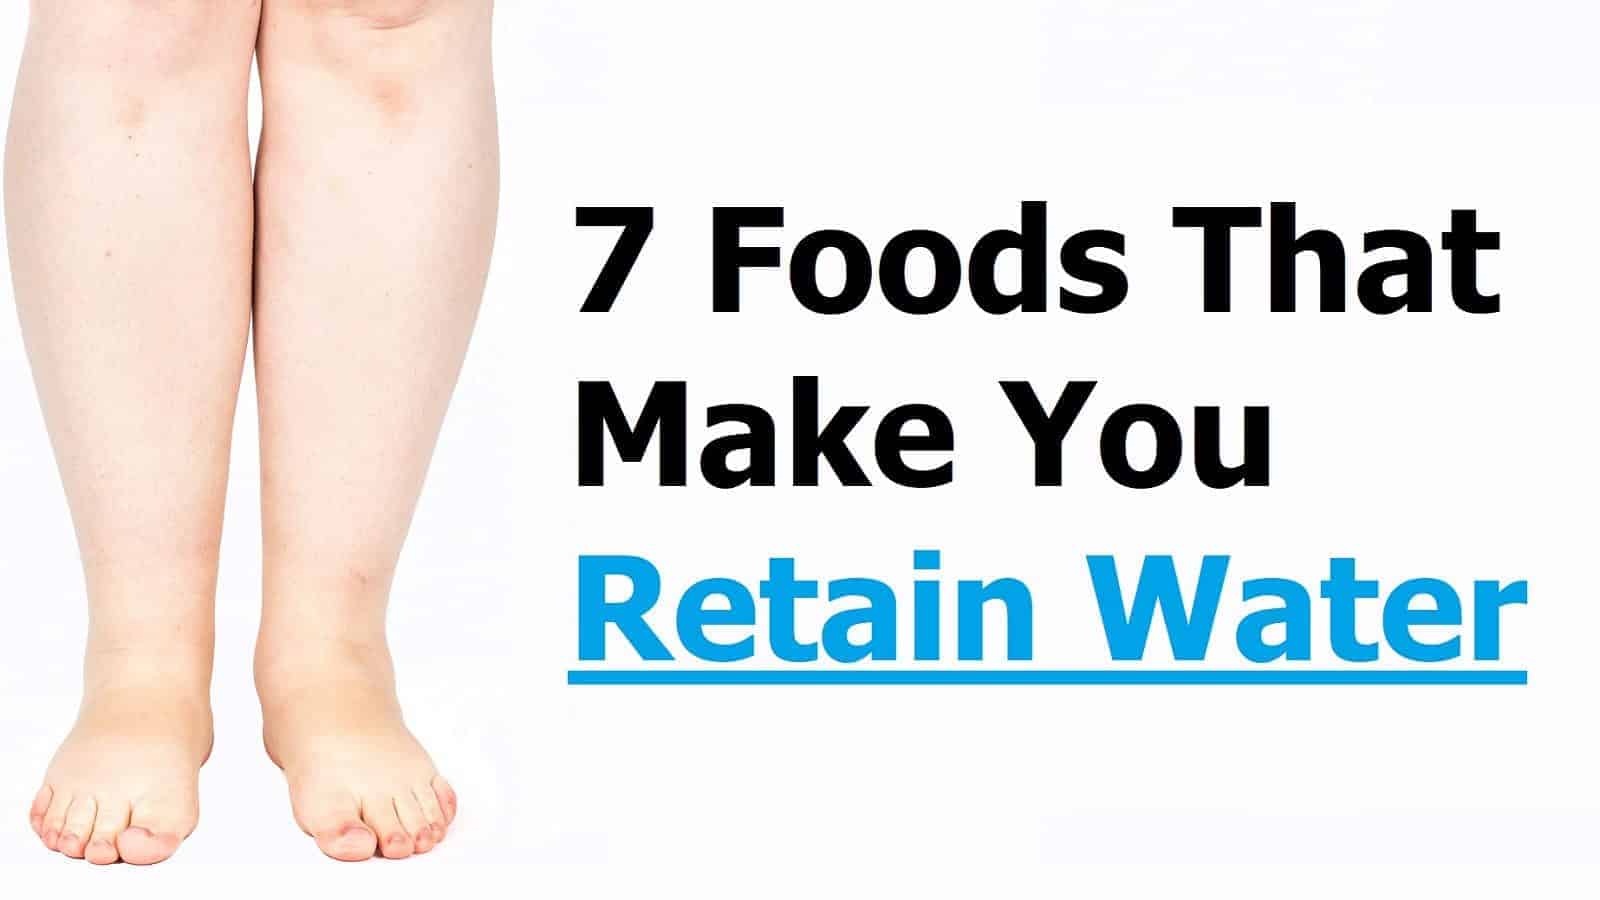 7 Foods That Make You Retain Water